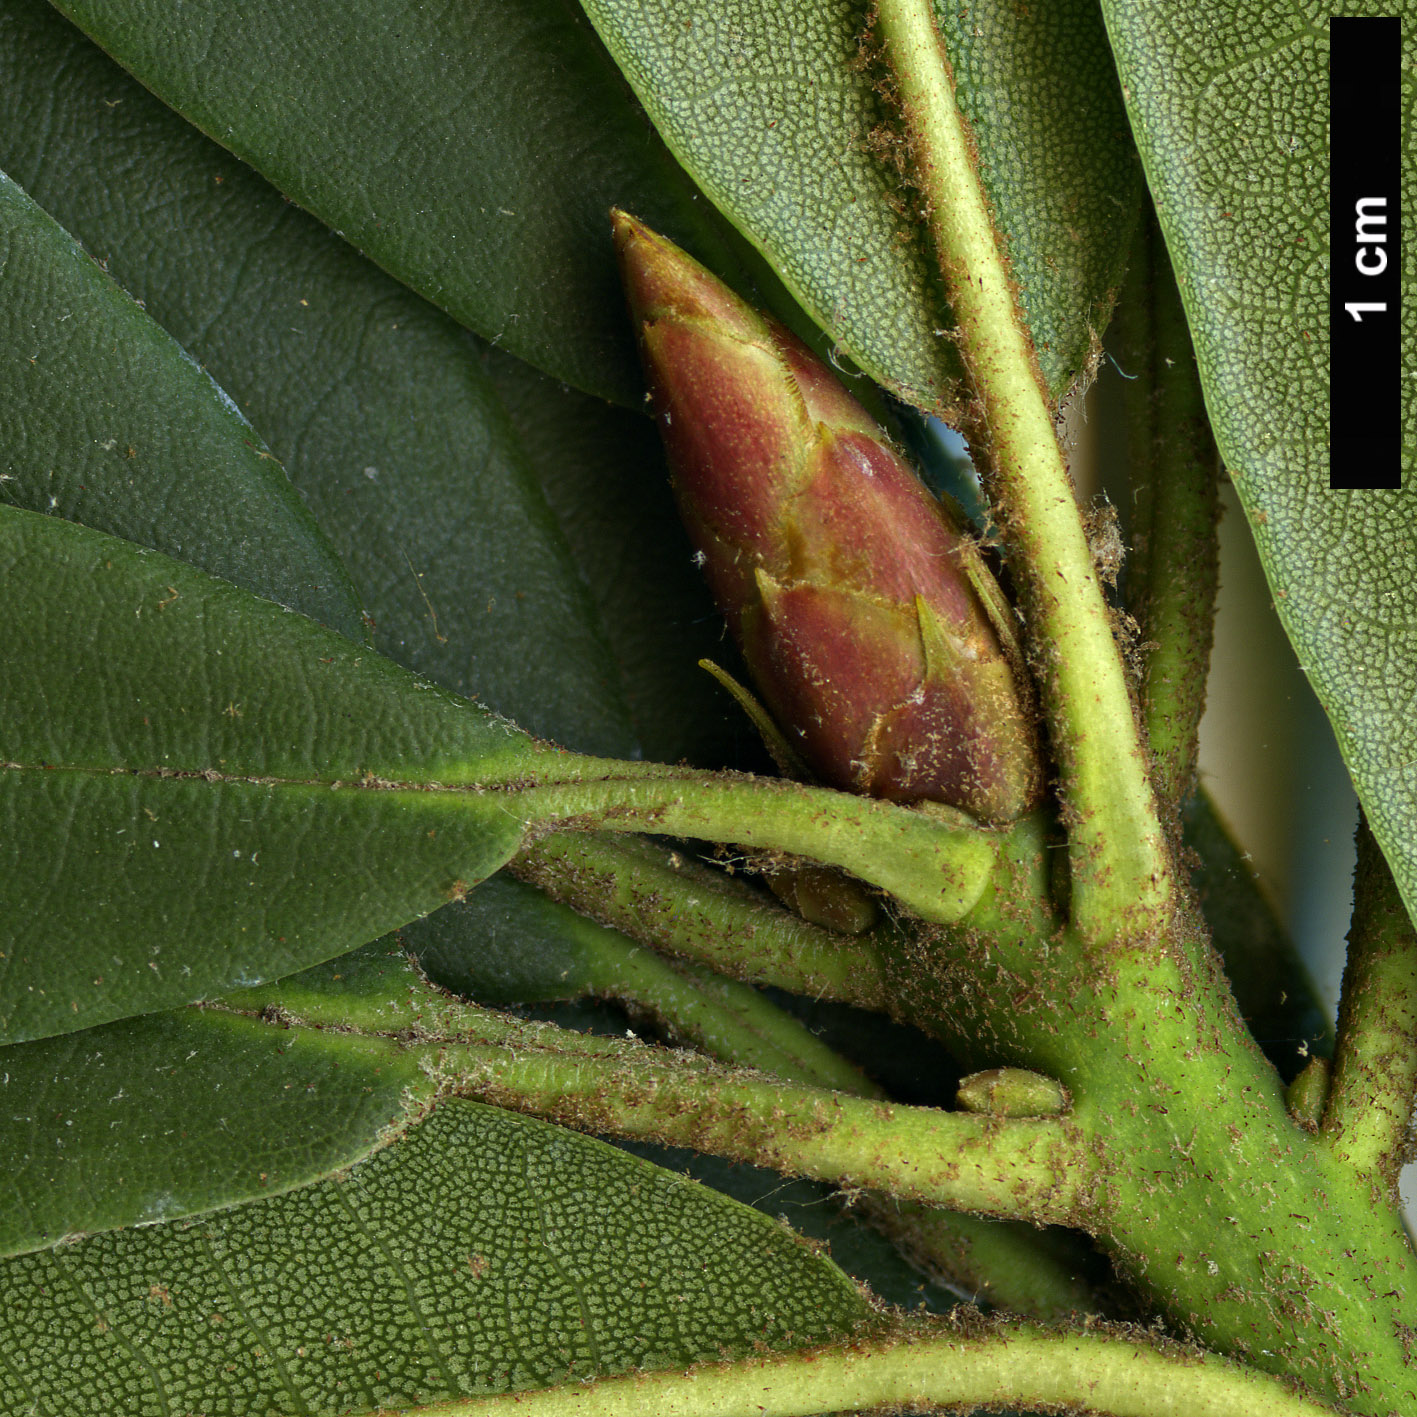 High resolution image: Family: Ericaceae - Genus: Rhododendron - Taxon: morii